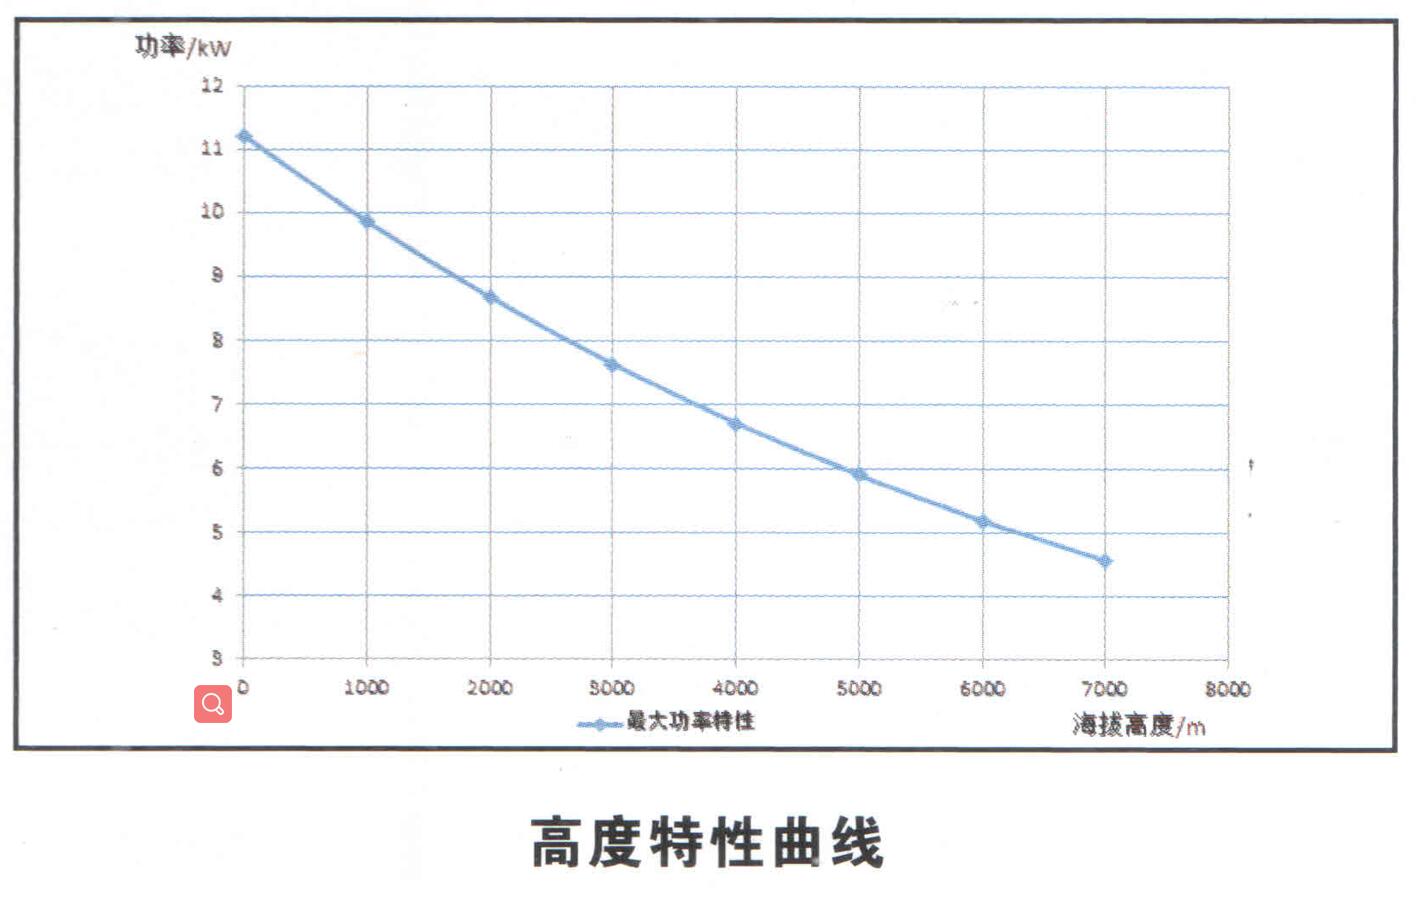 Heavy Fuel Piston Engine height characteristic curve